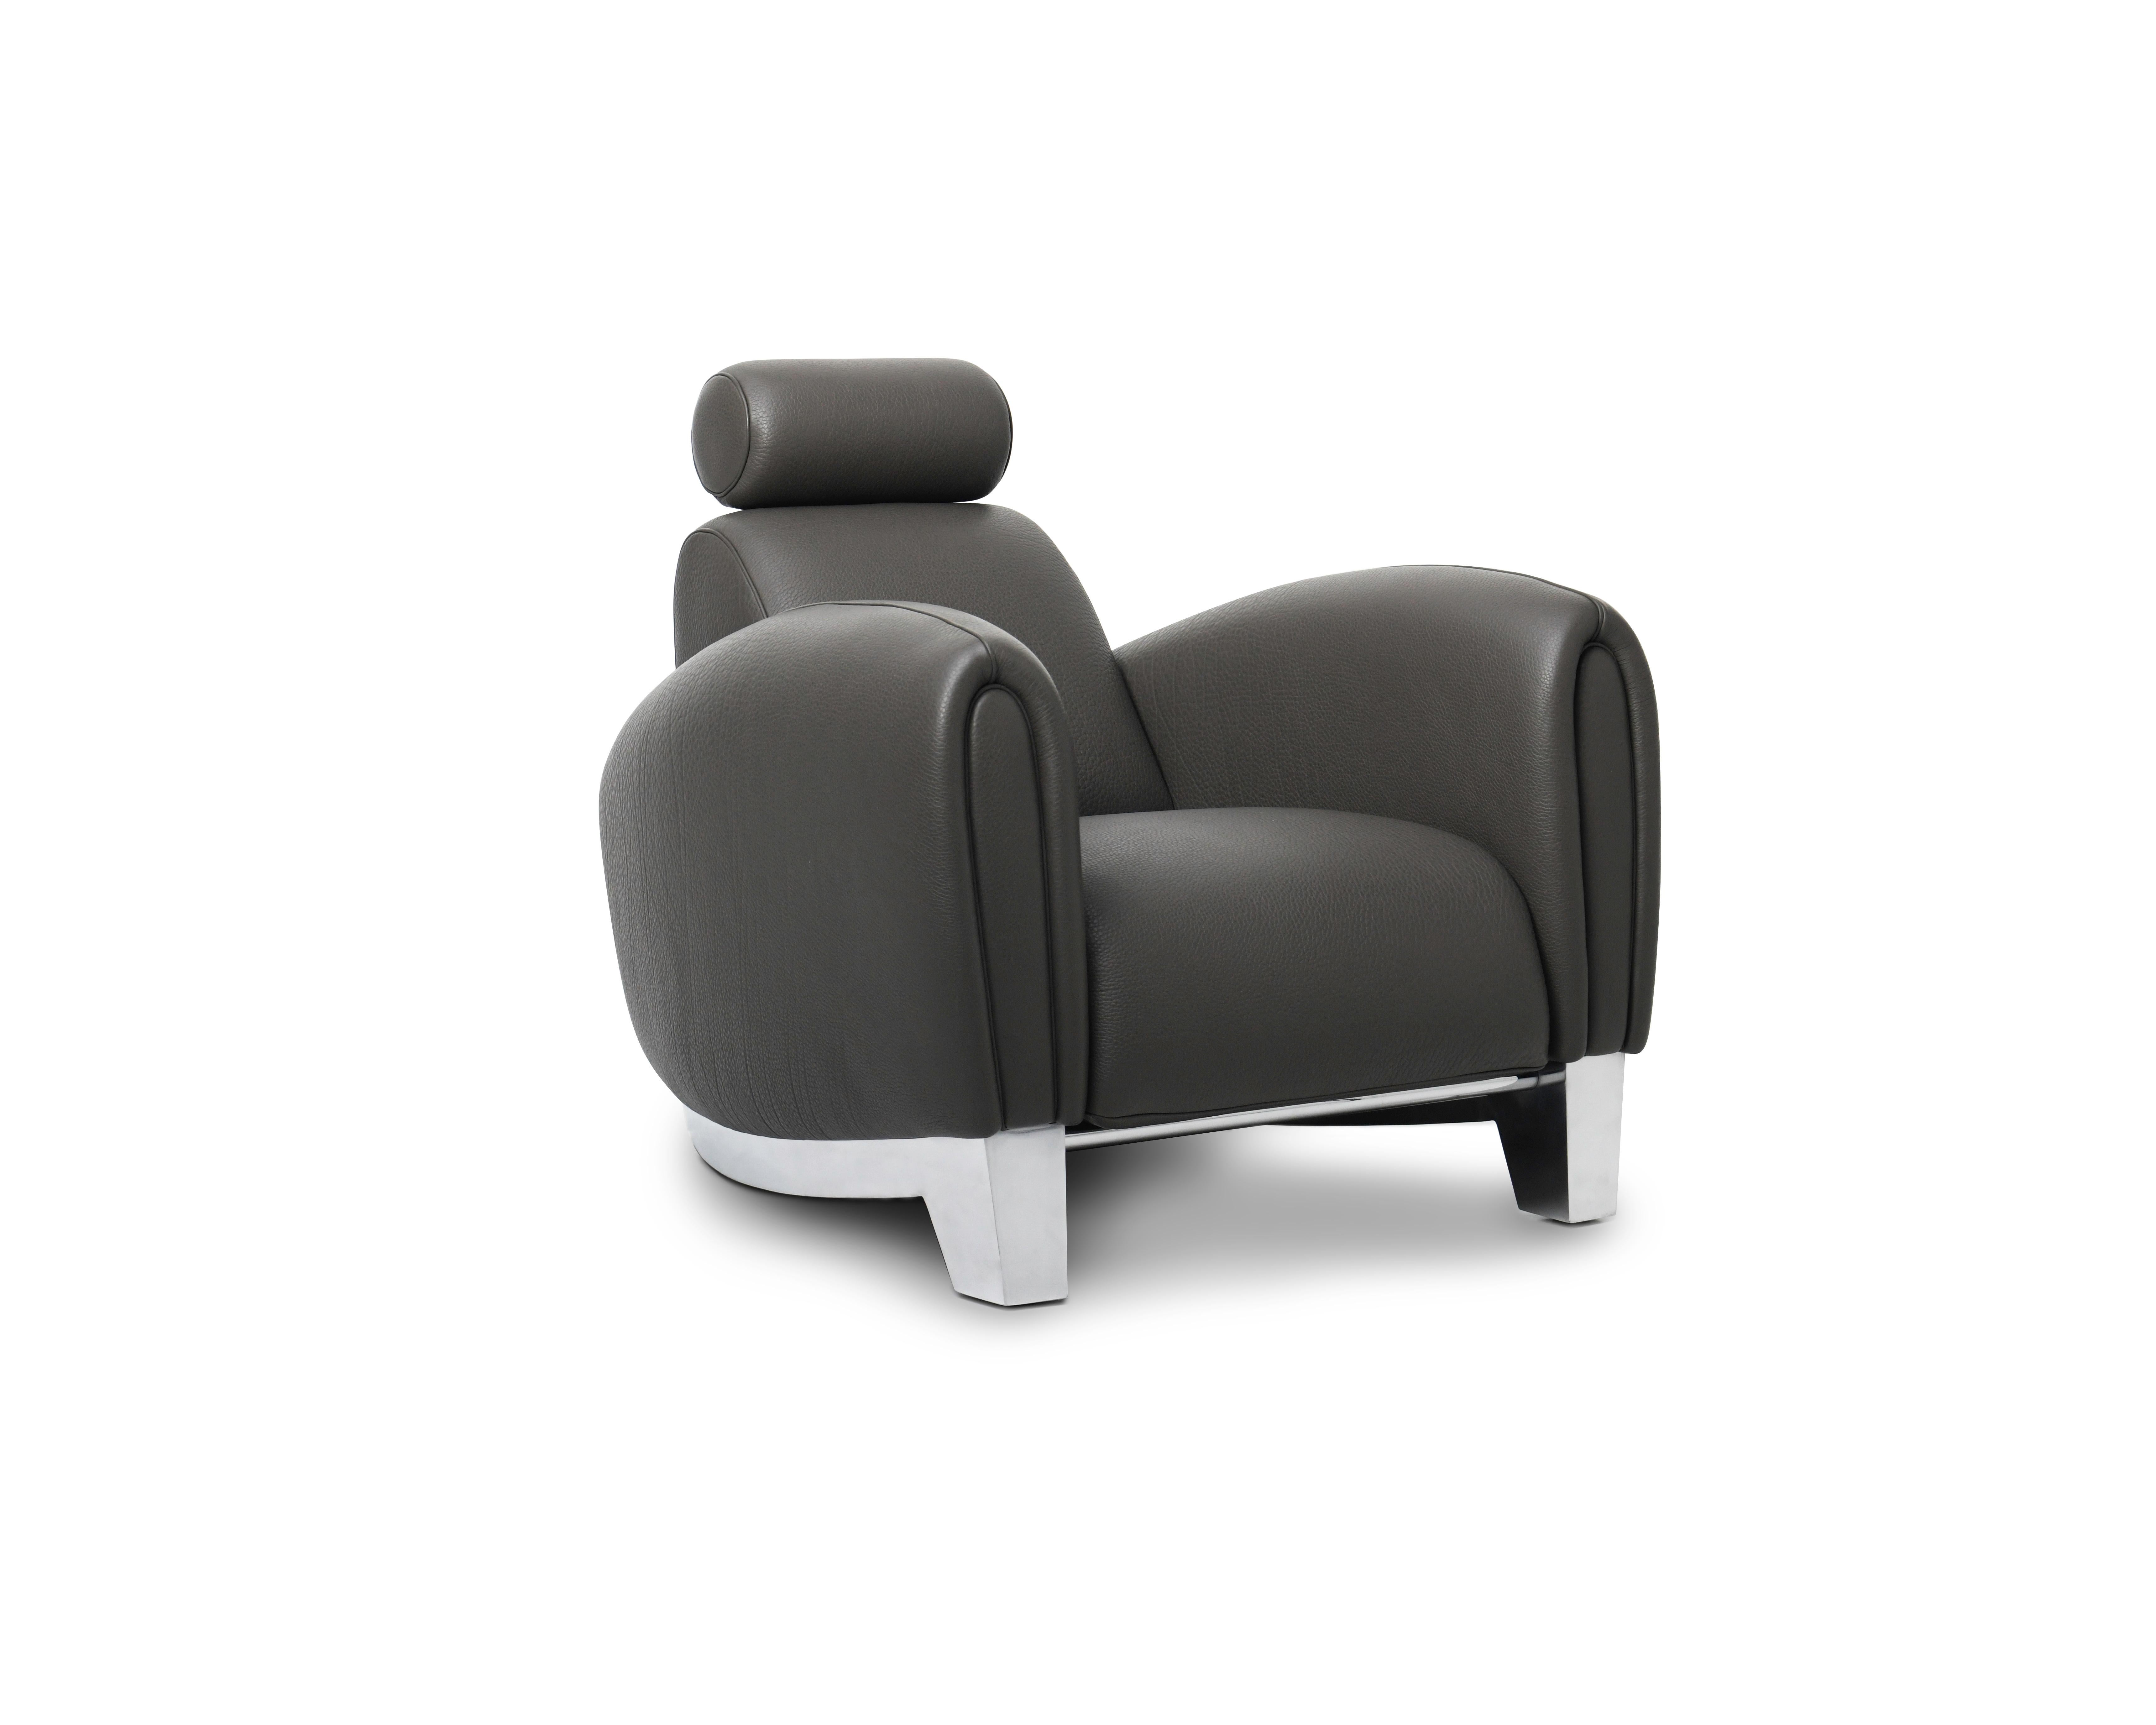 DS-57 armchair with headrest by De Sede
Dimensions: D 60 x W 90 x H 98 cm
Materials: base in solid beech in black lacquer, 
SEDEX upholstery with wadding cushion.
Armrest: moulded foam with wadding cushion.

Prices may change according to the